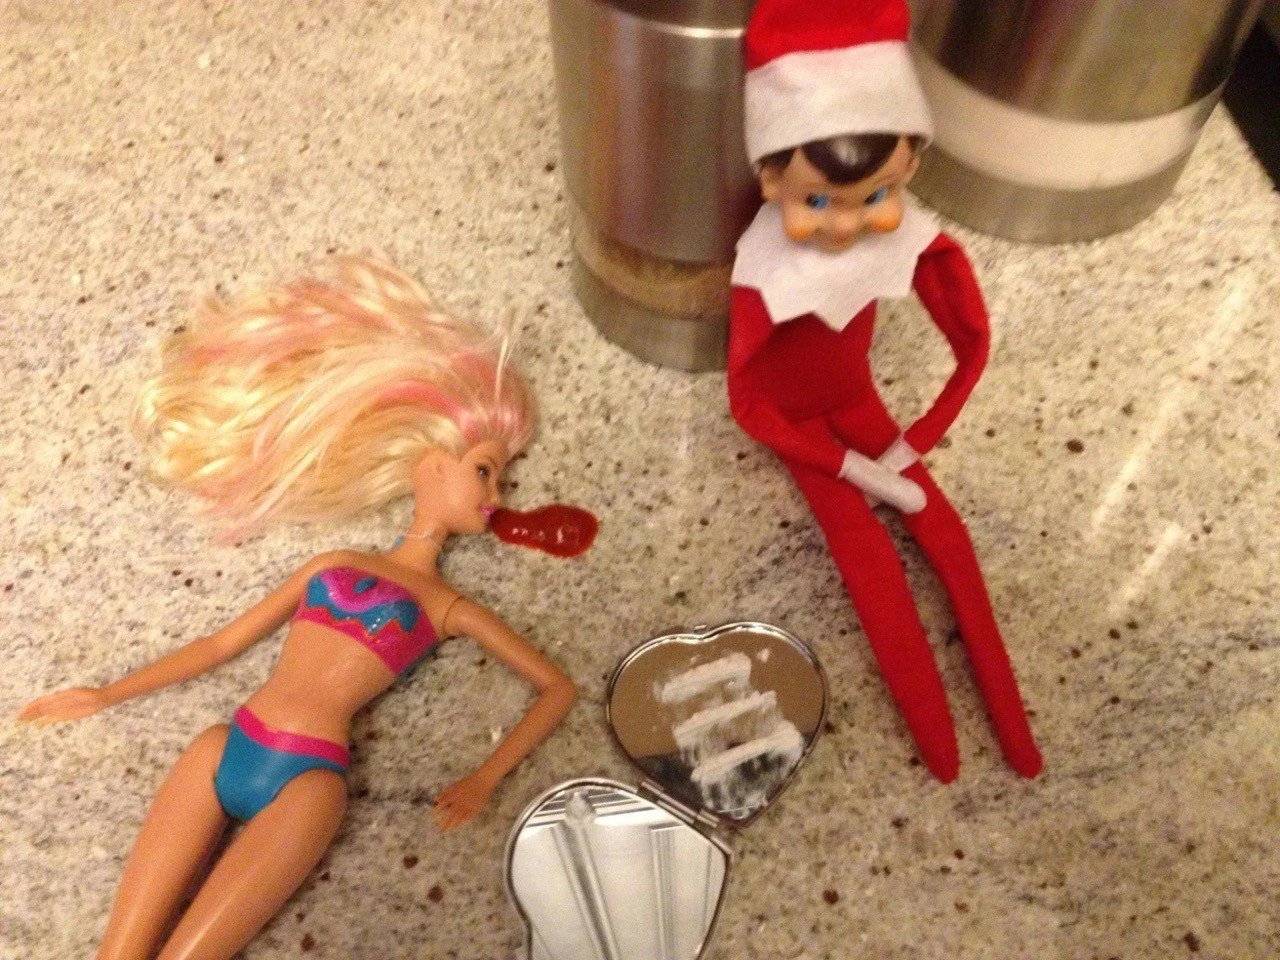 aj samson recommends dirty elf on the shelf pictures pic